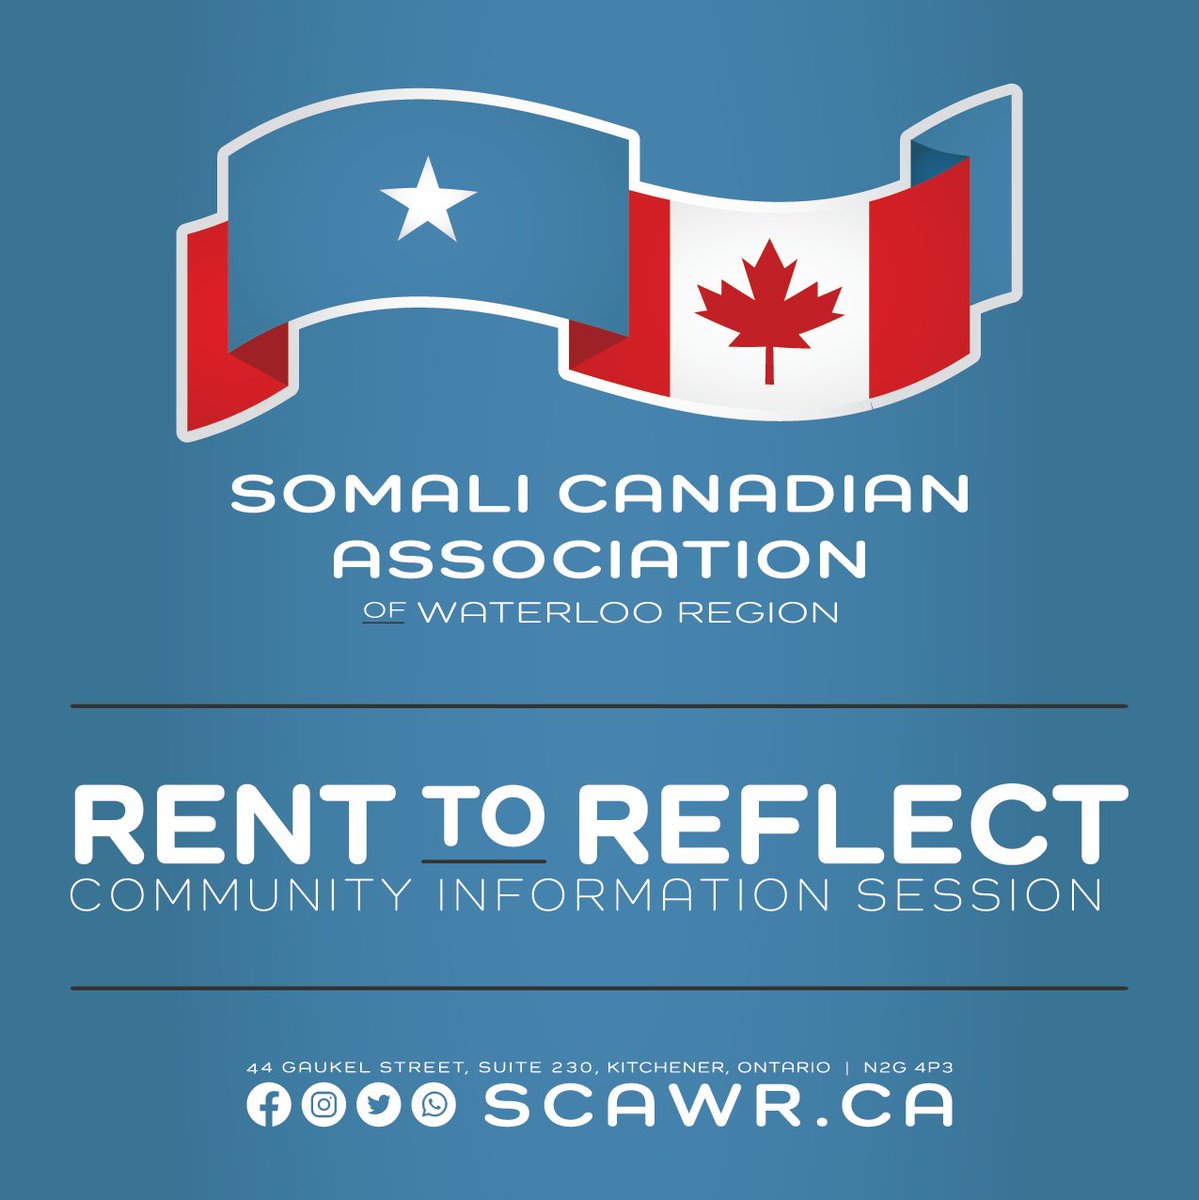 It’s #NationalHousingDayWR! SCAWR will be at the #BuildingCommunitiesTogether event hosted by @RegionWaterloo 

#grassroots
#diversity 
#affordablehousing
#opportunity 
#ourcommunity